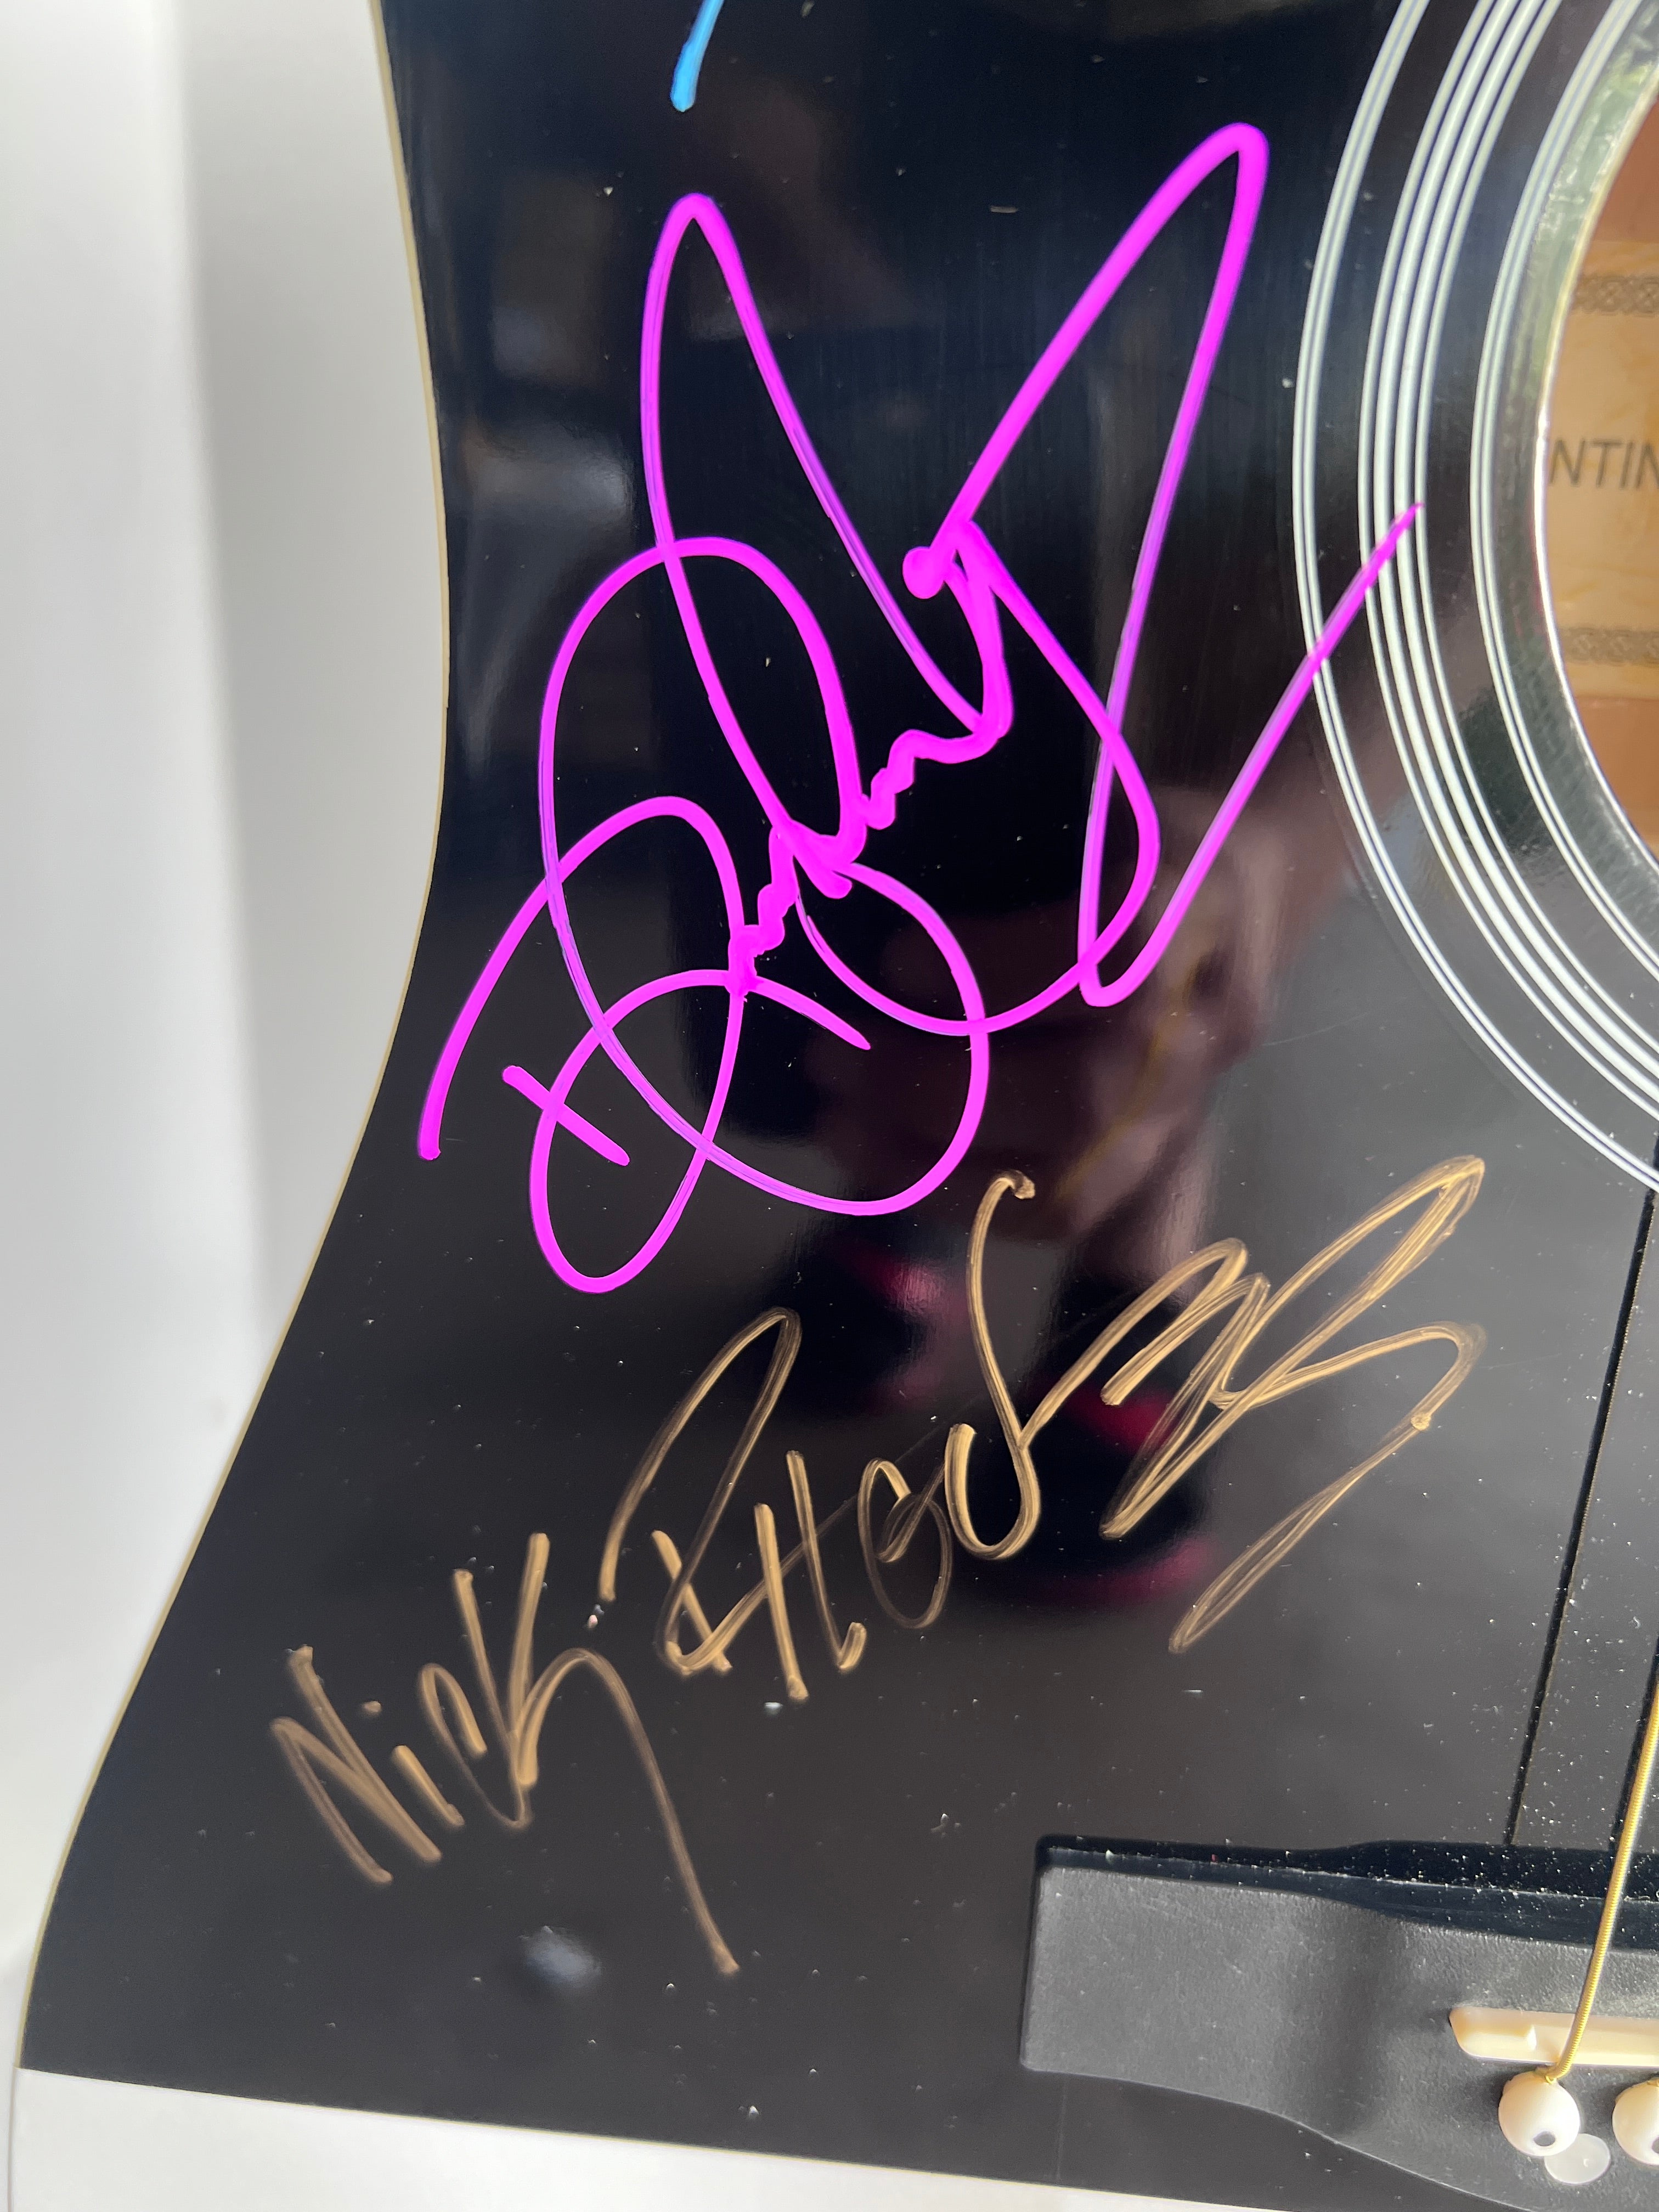 Duran Duran Simon Le Bon, John Taylor, Nick Rhodes Roger Taylor and Andy Taylor one-of-a-kind full size acoustic guitar signed with proof